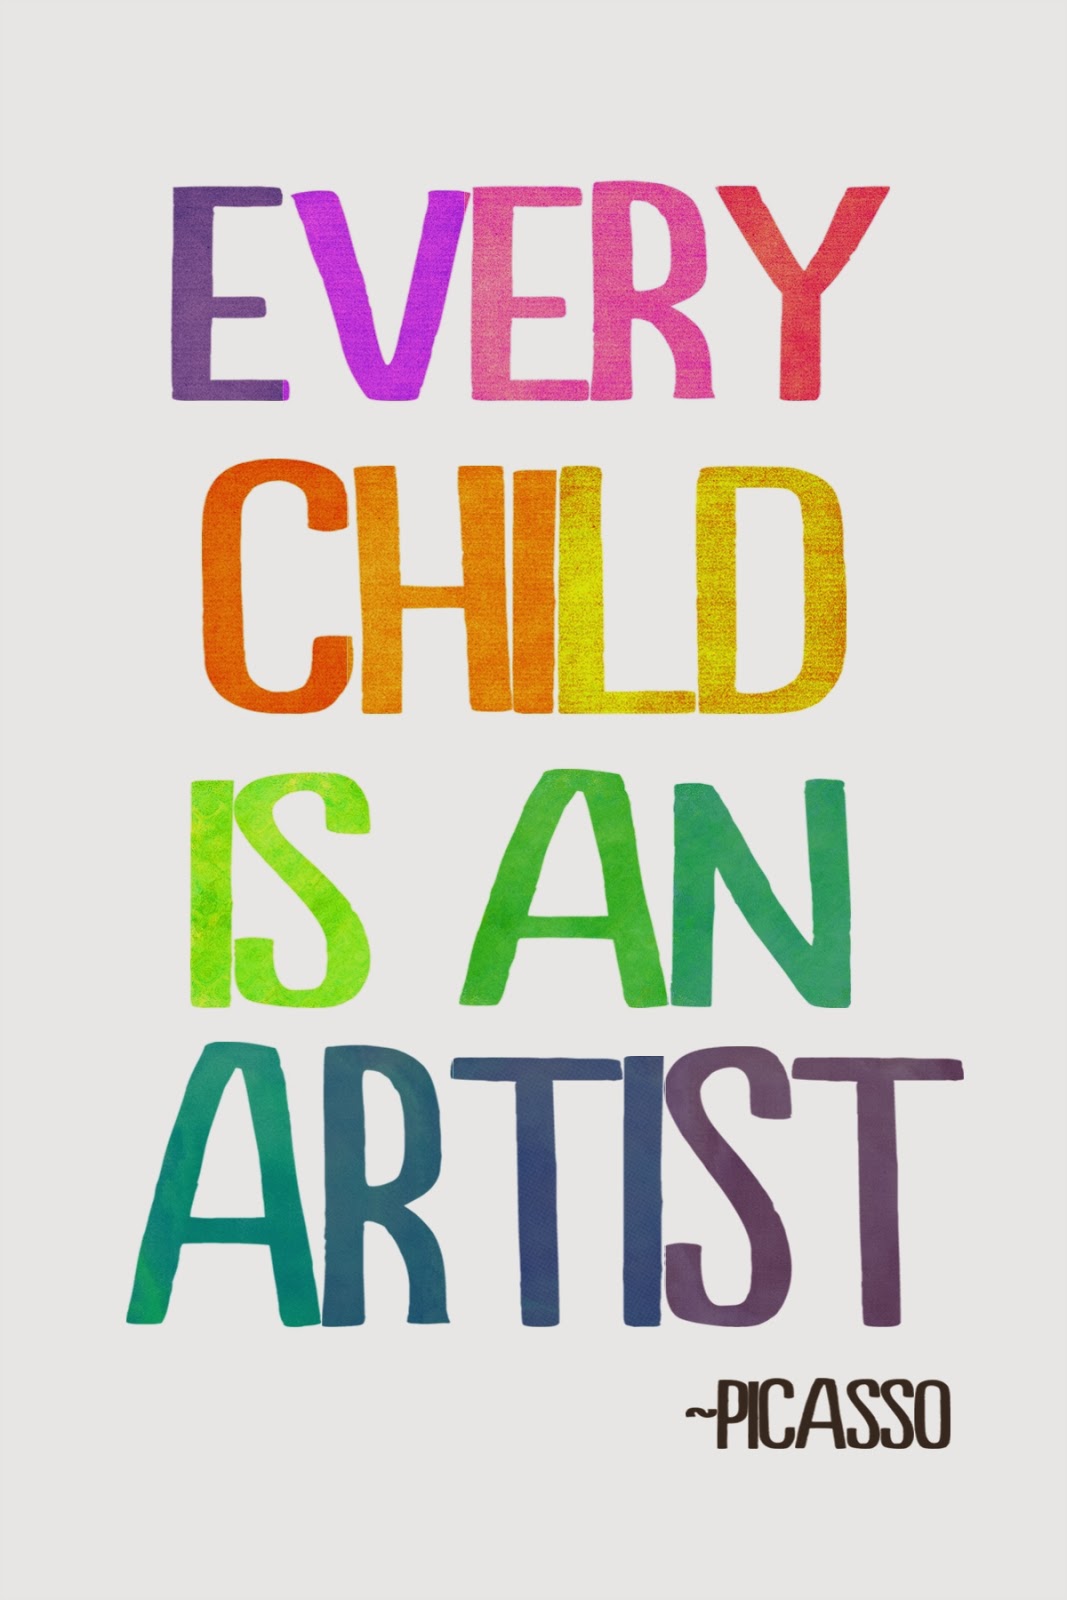 Every child is an artist. Picasso